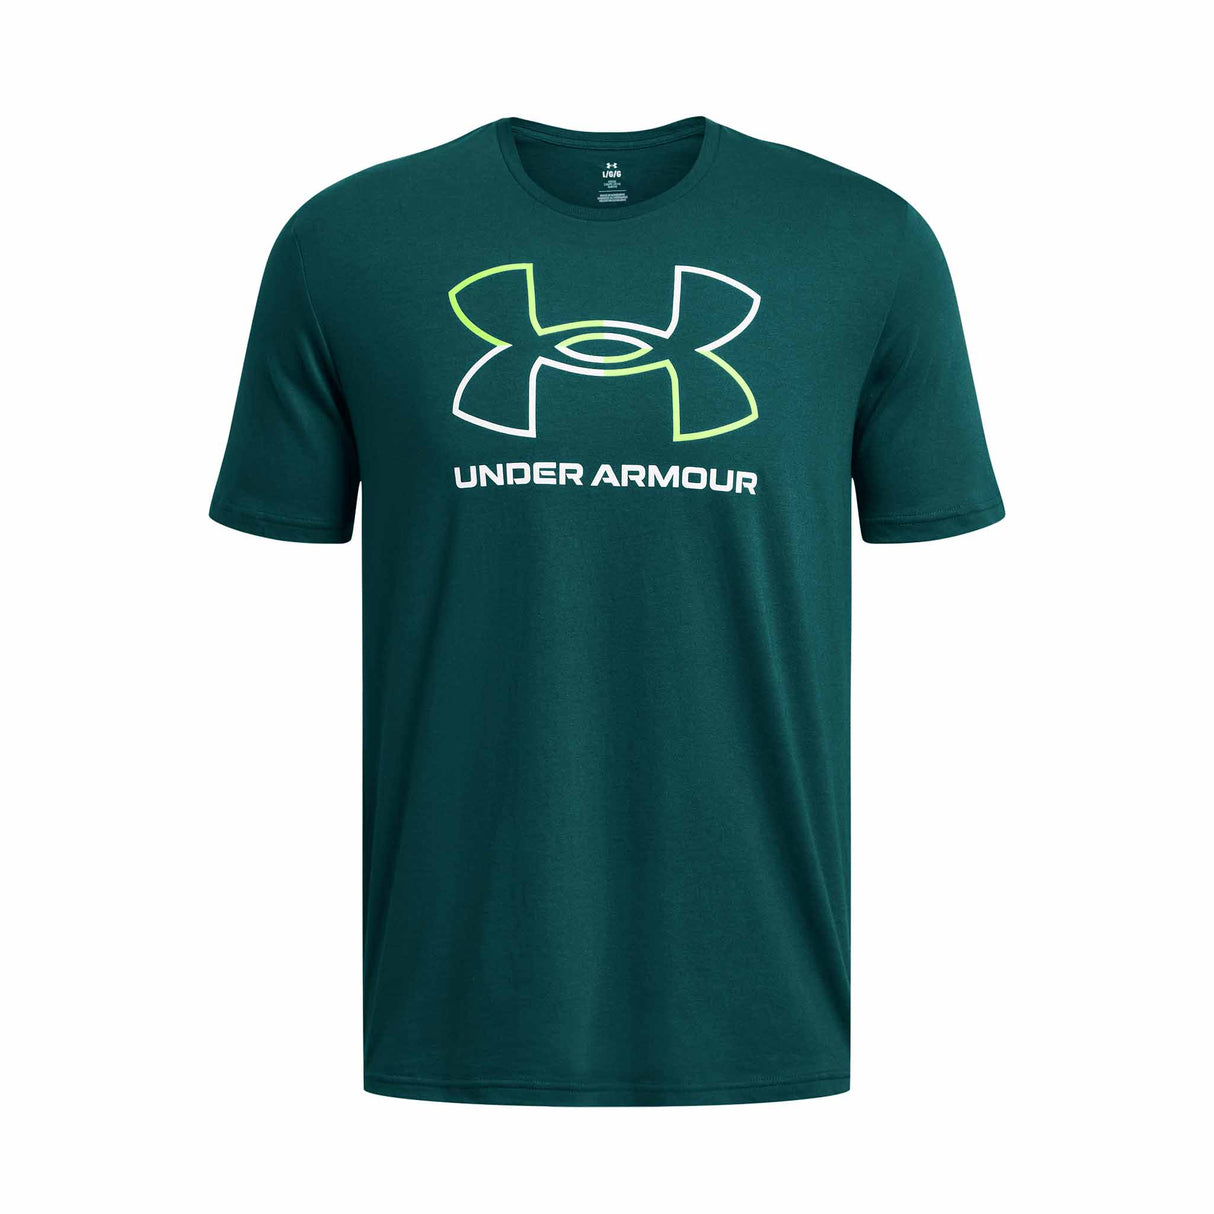 Under Armour GL Foundation Update t-shirt homme - Hydro Teal / White